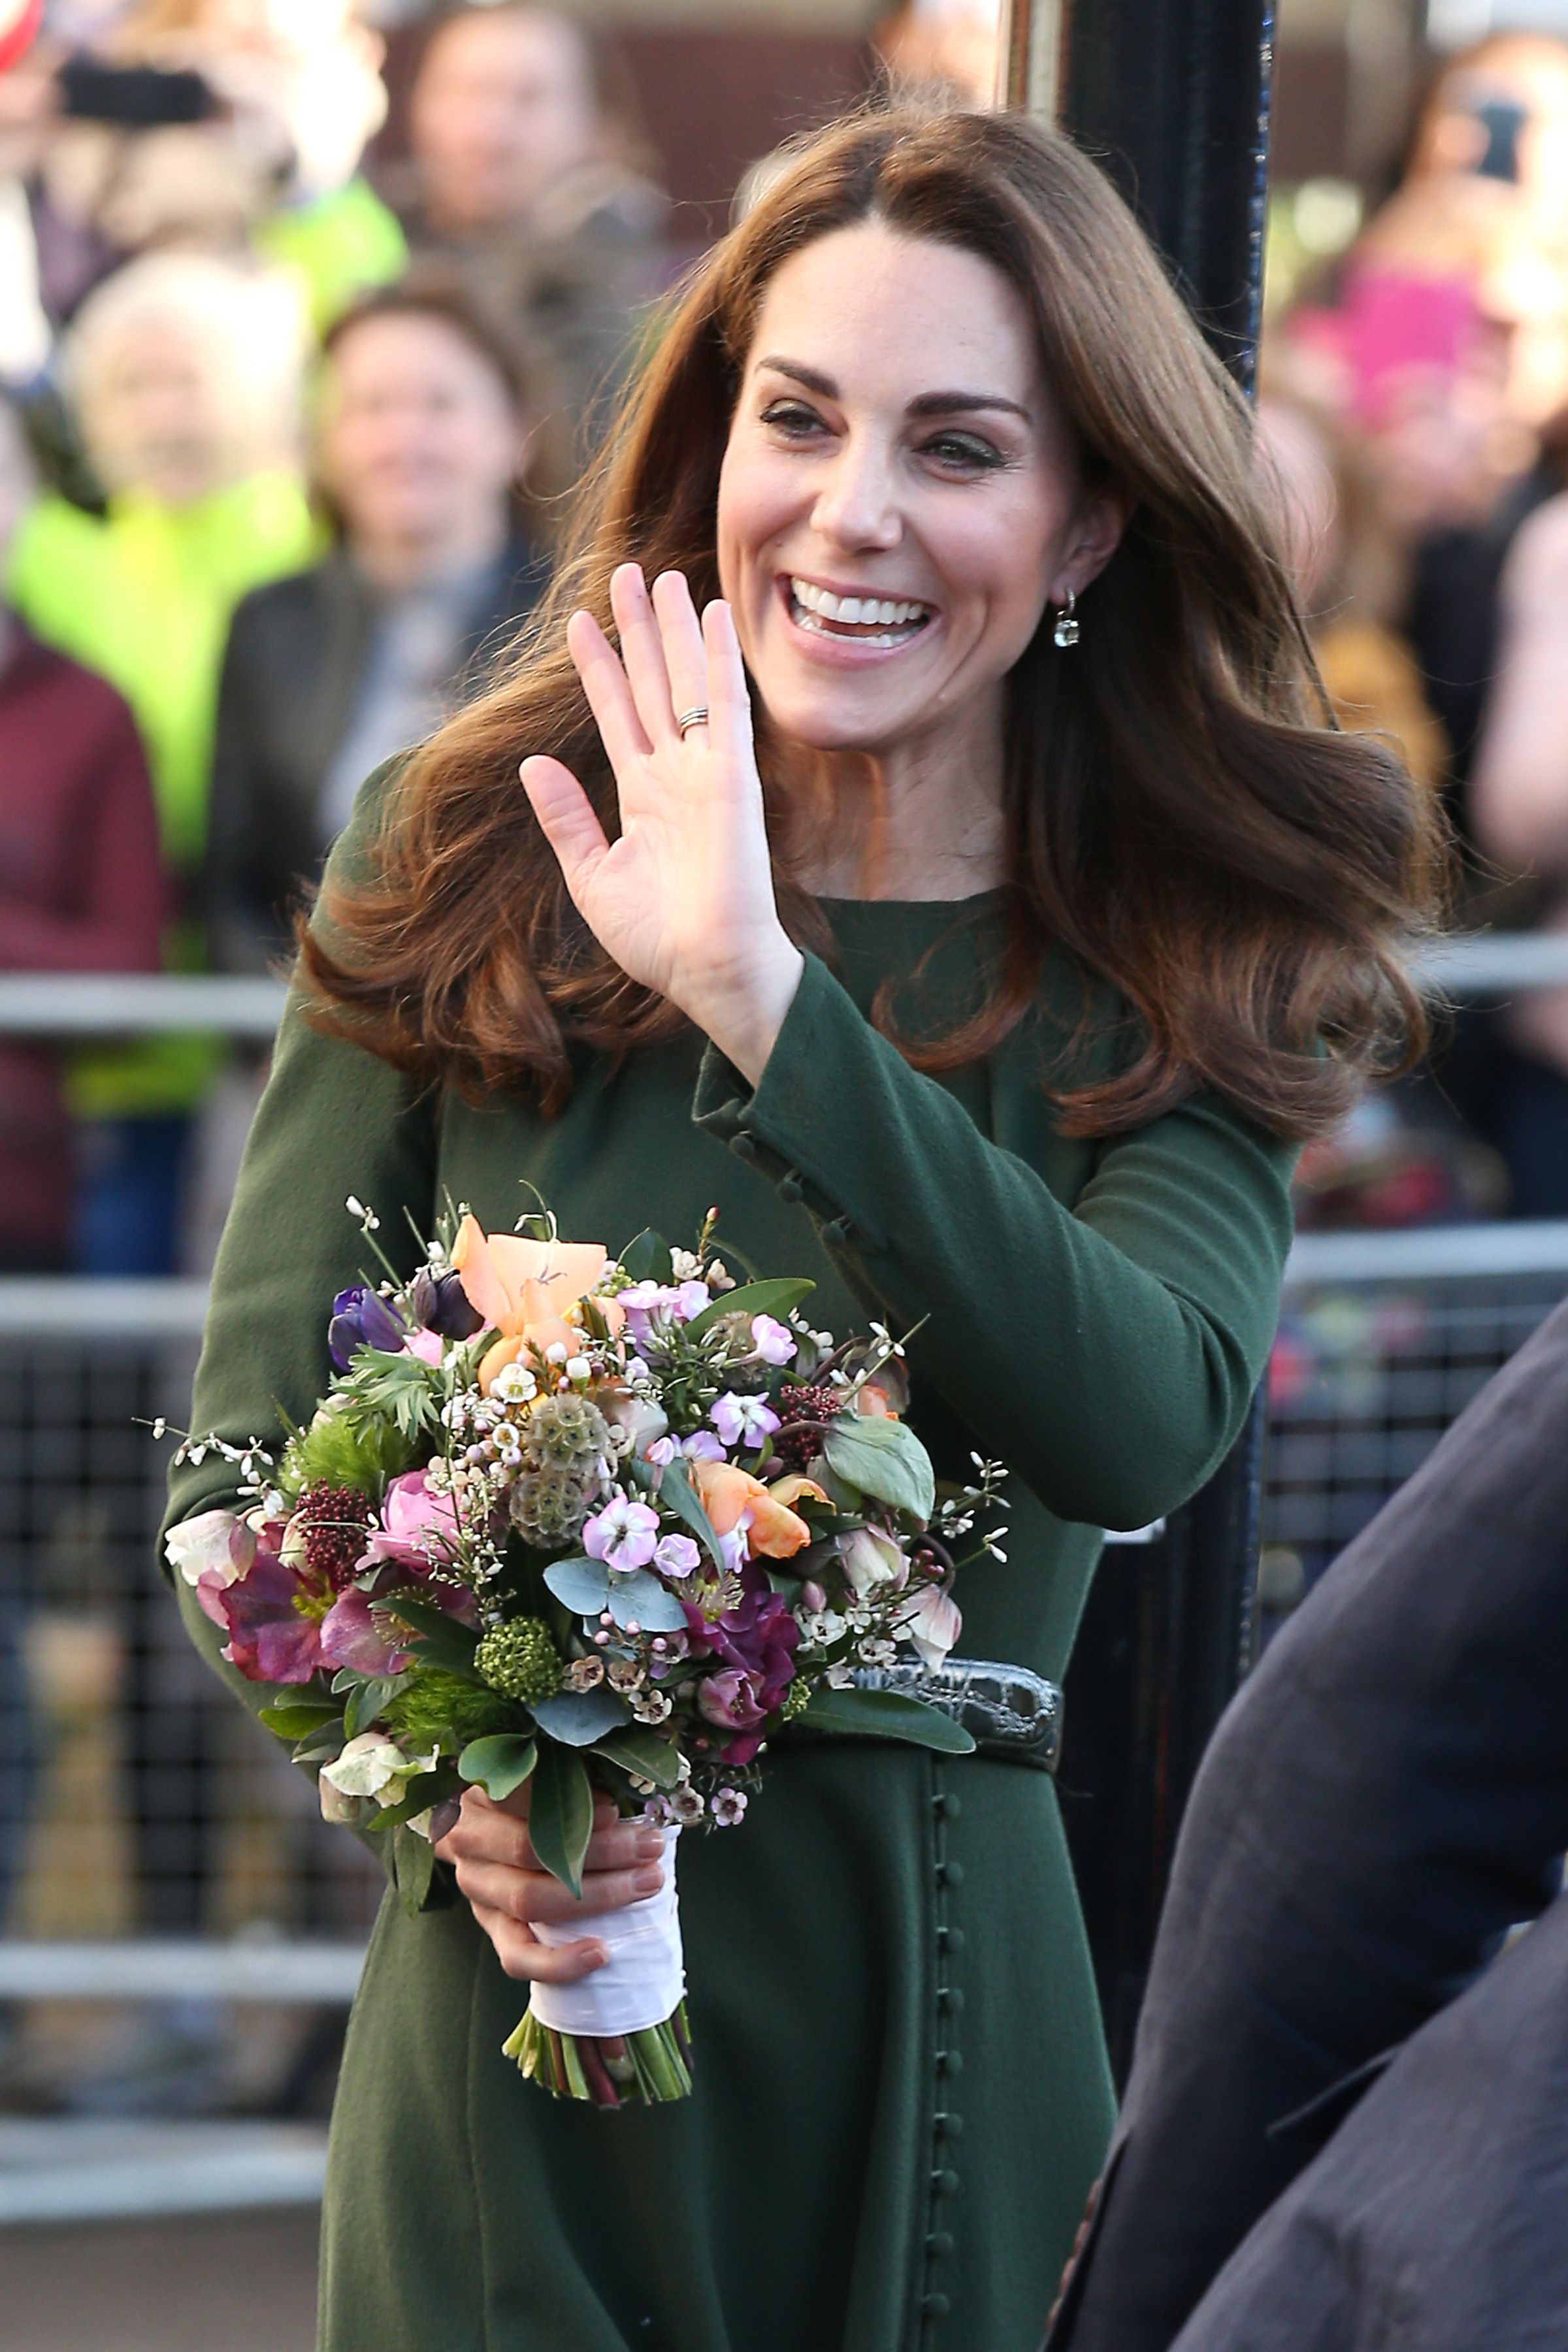 catherine-duchess-of-cambridge-departs-from-family-action-news-photo-1097850810-1548186881.jpg